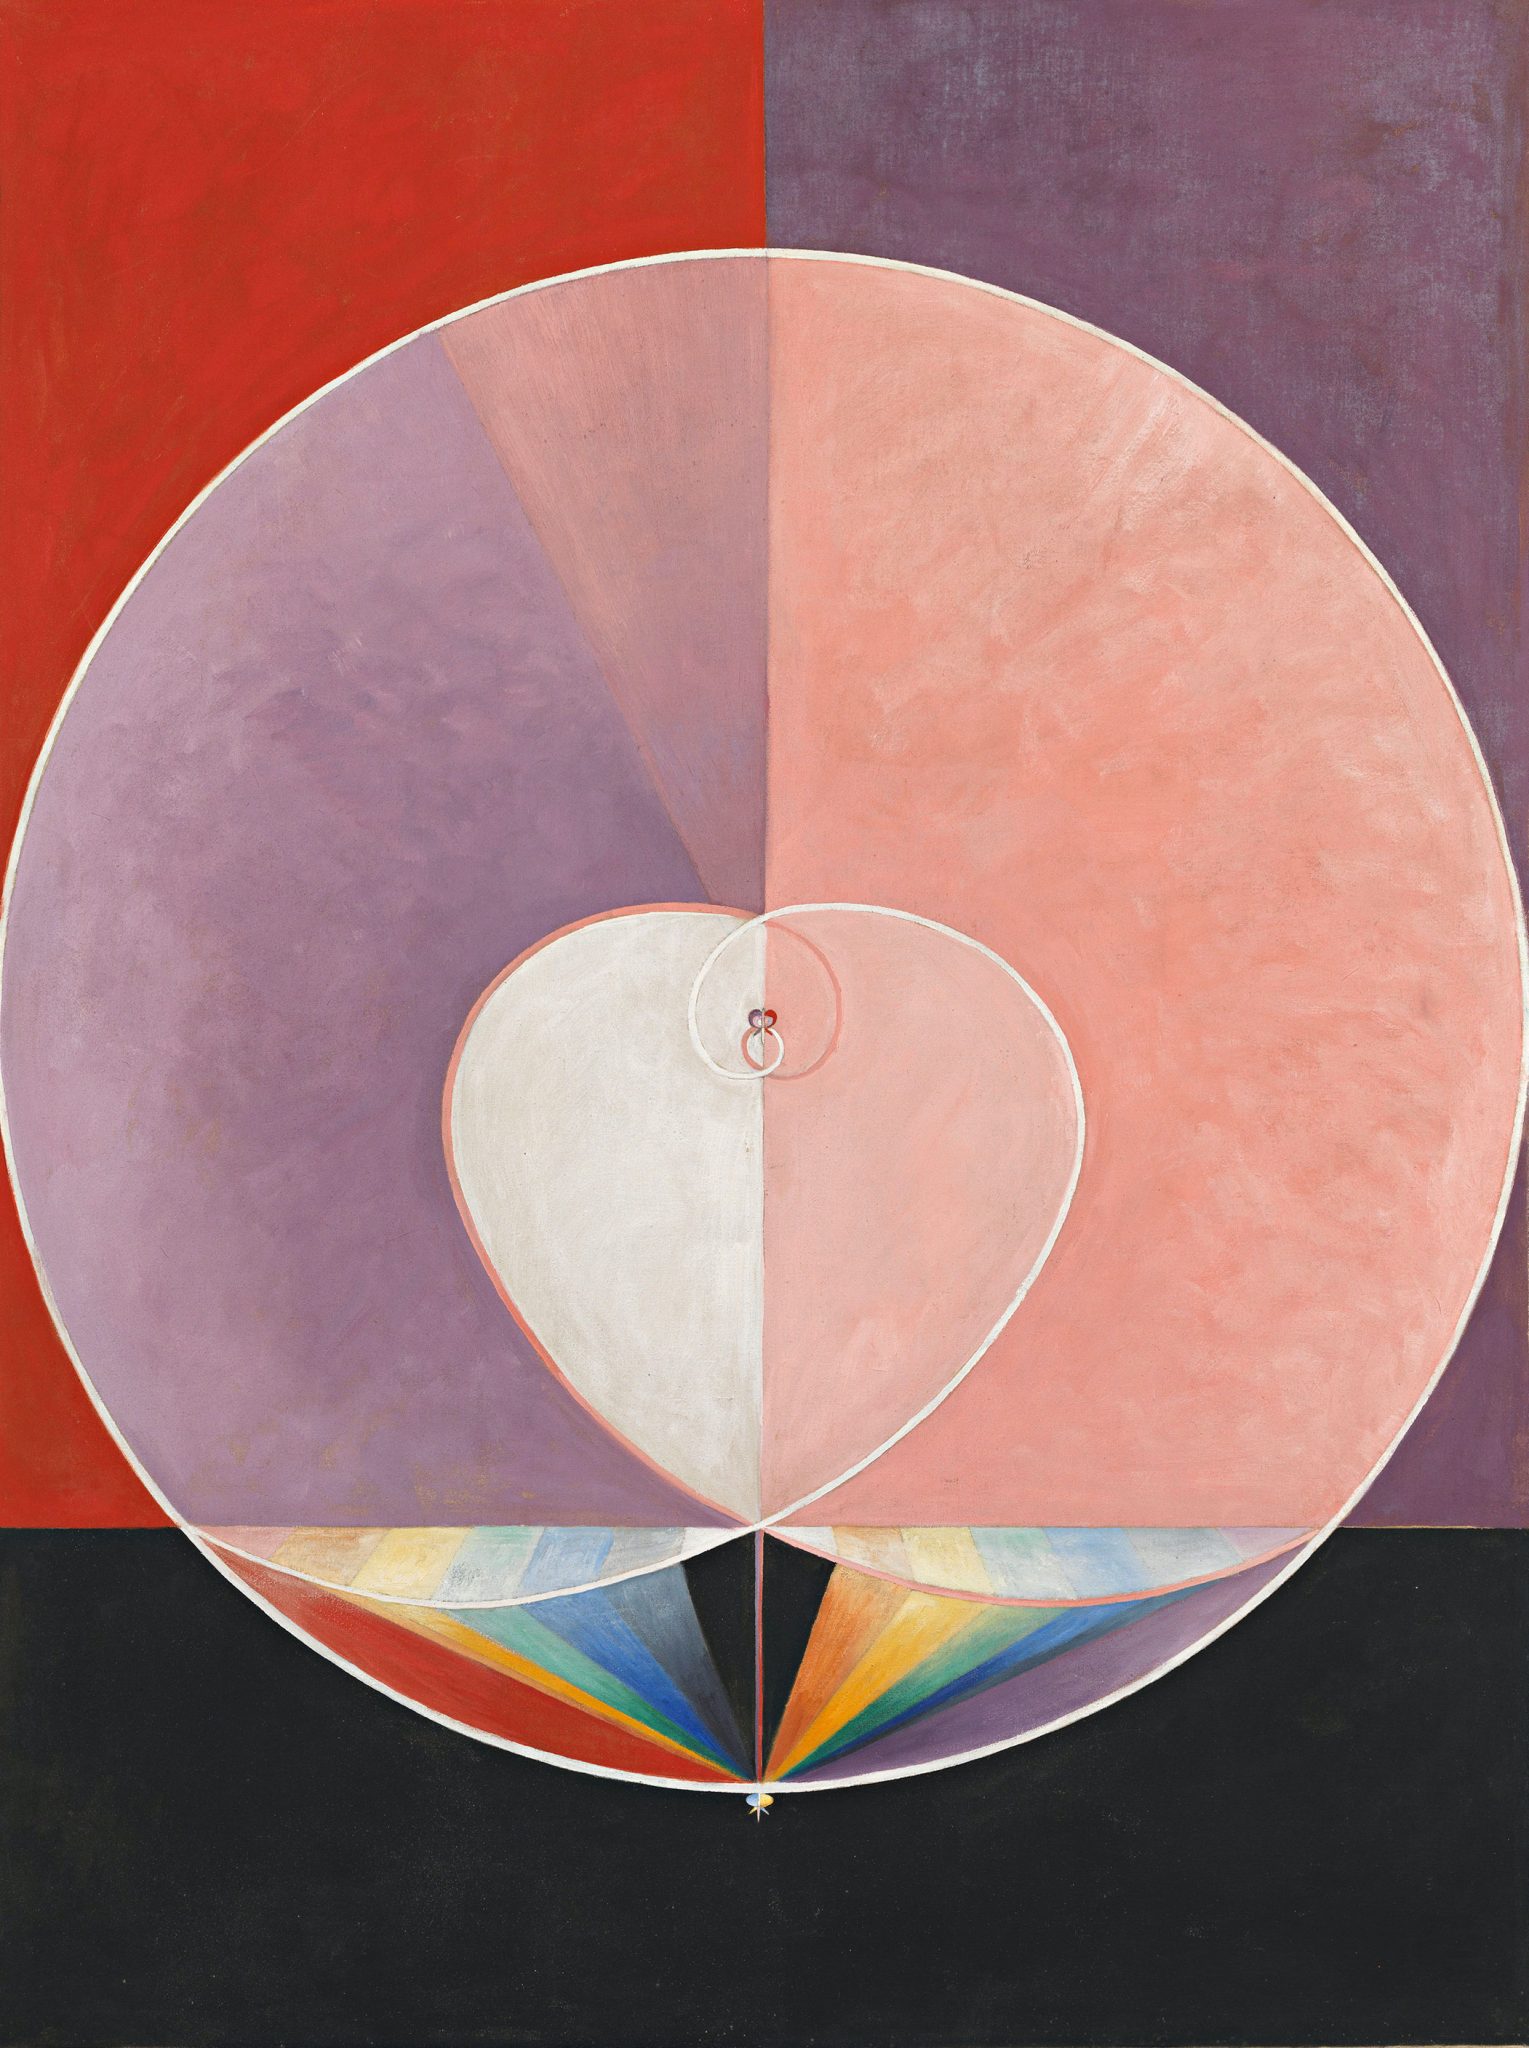 Read more about the article New Hilma af Klint Documentary Explores the Abstract Artist’s Legacy Like We’ve Never Seen Before